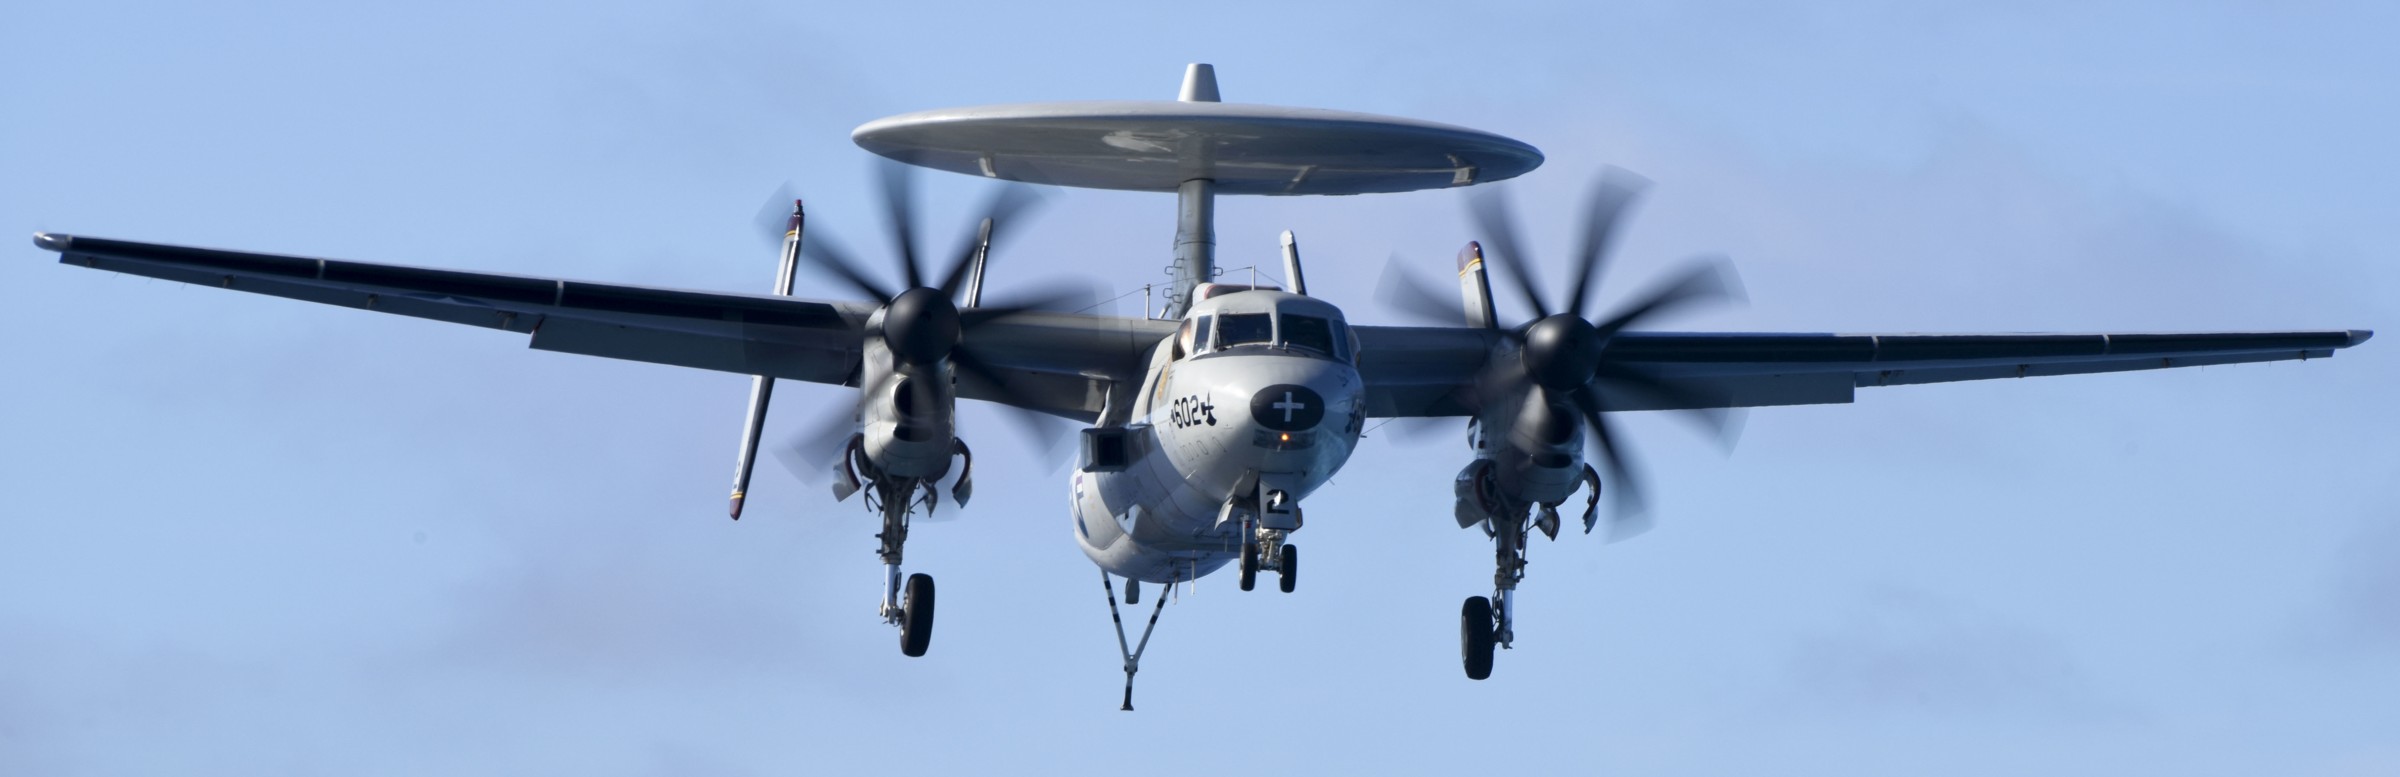 vaw-116 sun kings airborne command control squadron carrier early warning cvw-17 uss theodore roosevelt cvn-71 64